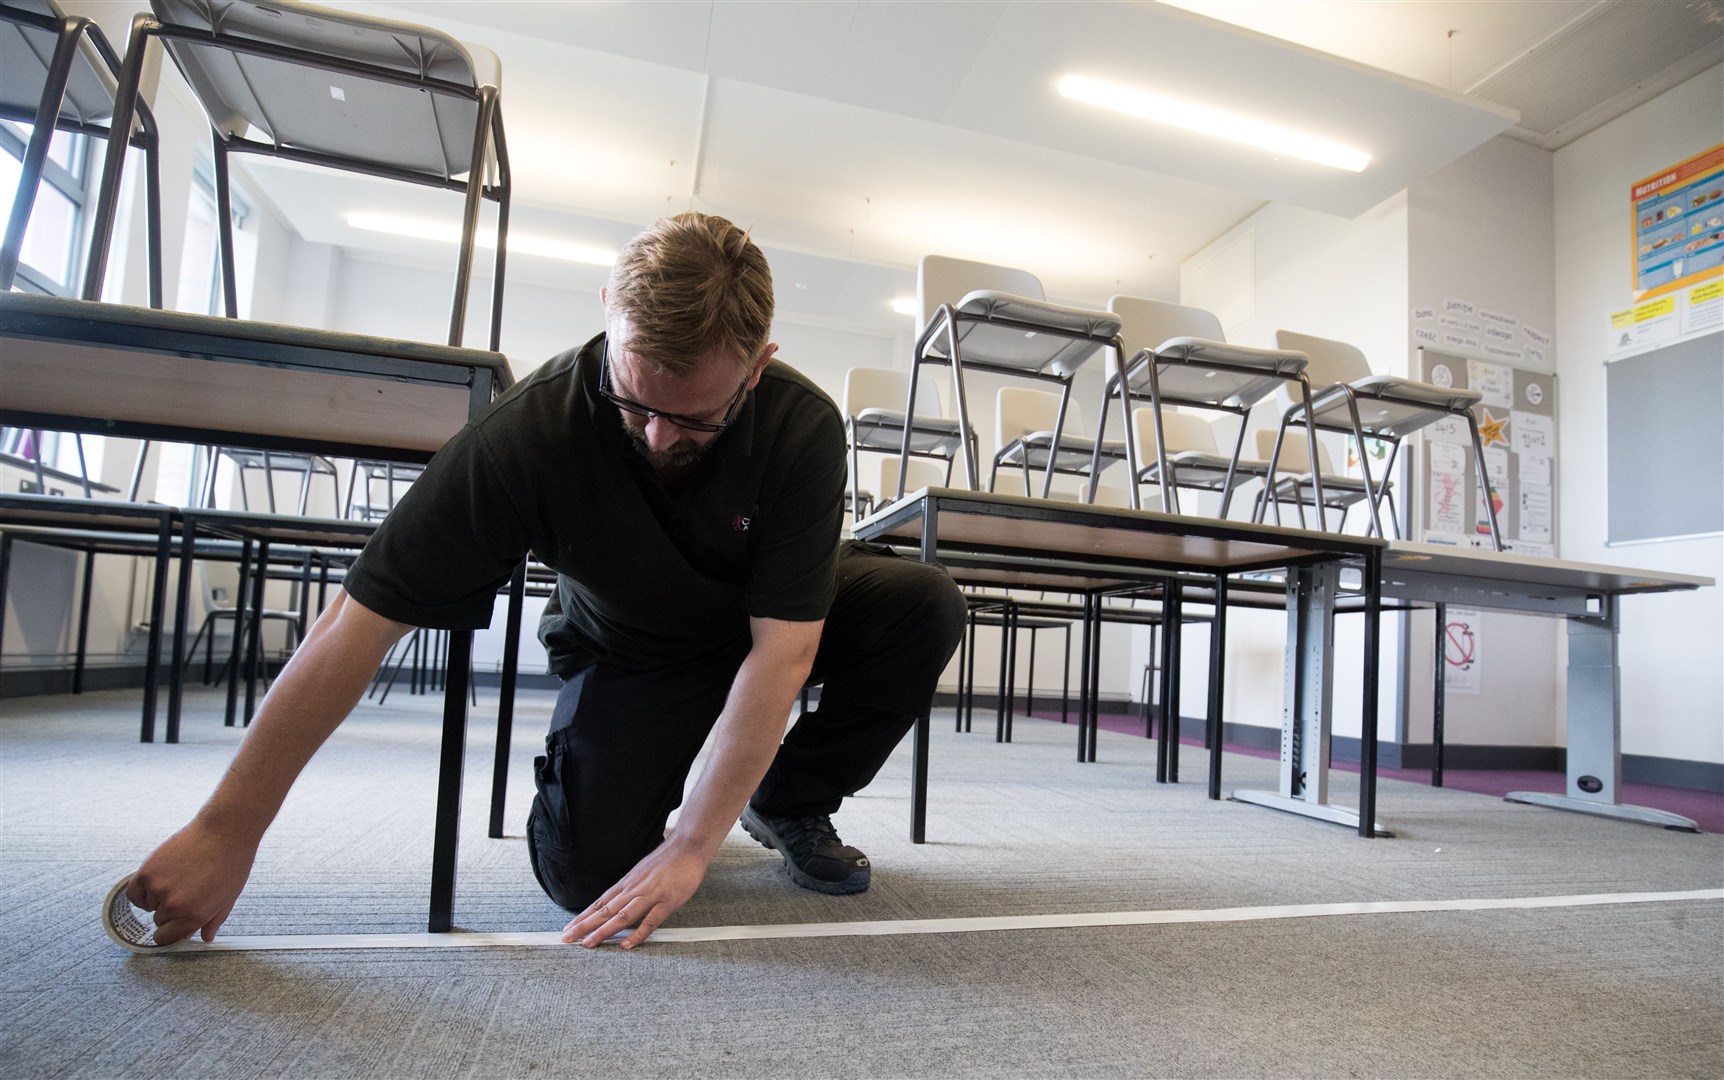 A boundary line is taped to the floor in a classroom at Ark Charter Academy in Portsmouth, as preparations are made before the start of the new term (Andrew Matthews/PA)